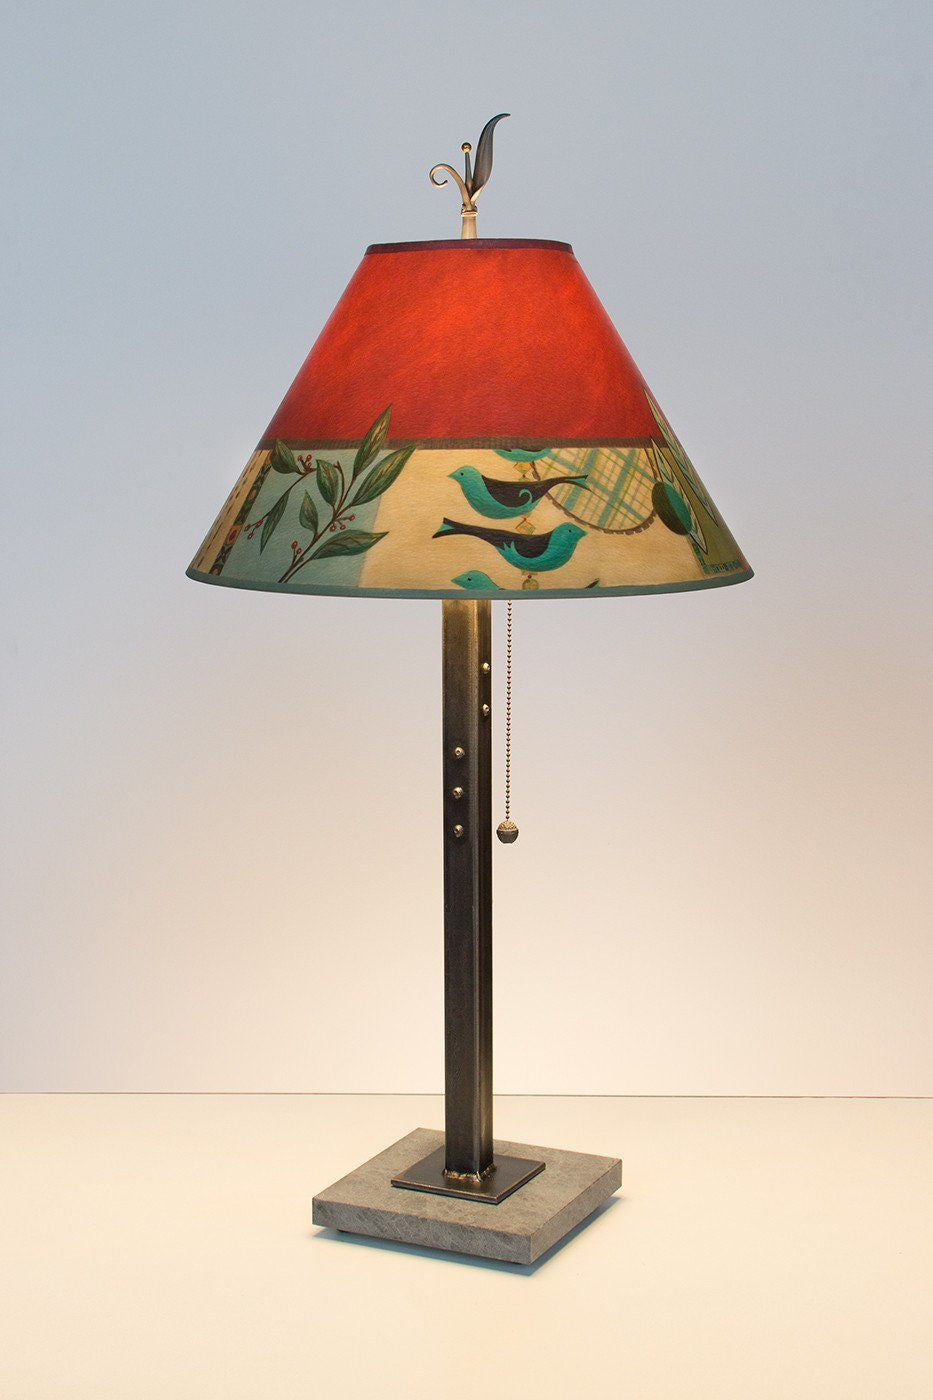 Steel Table Lamp on Marble with Medium Conical Shade in New Capri Lit